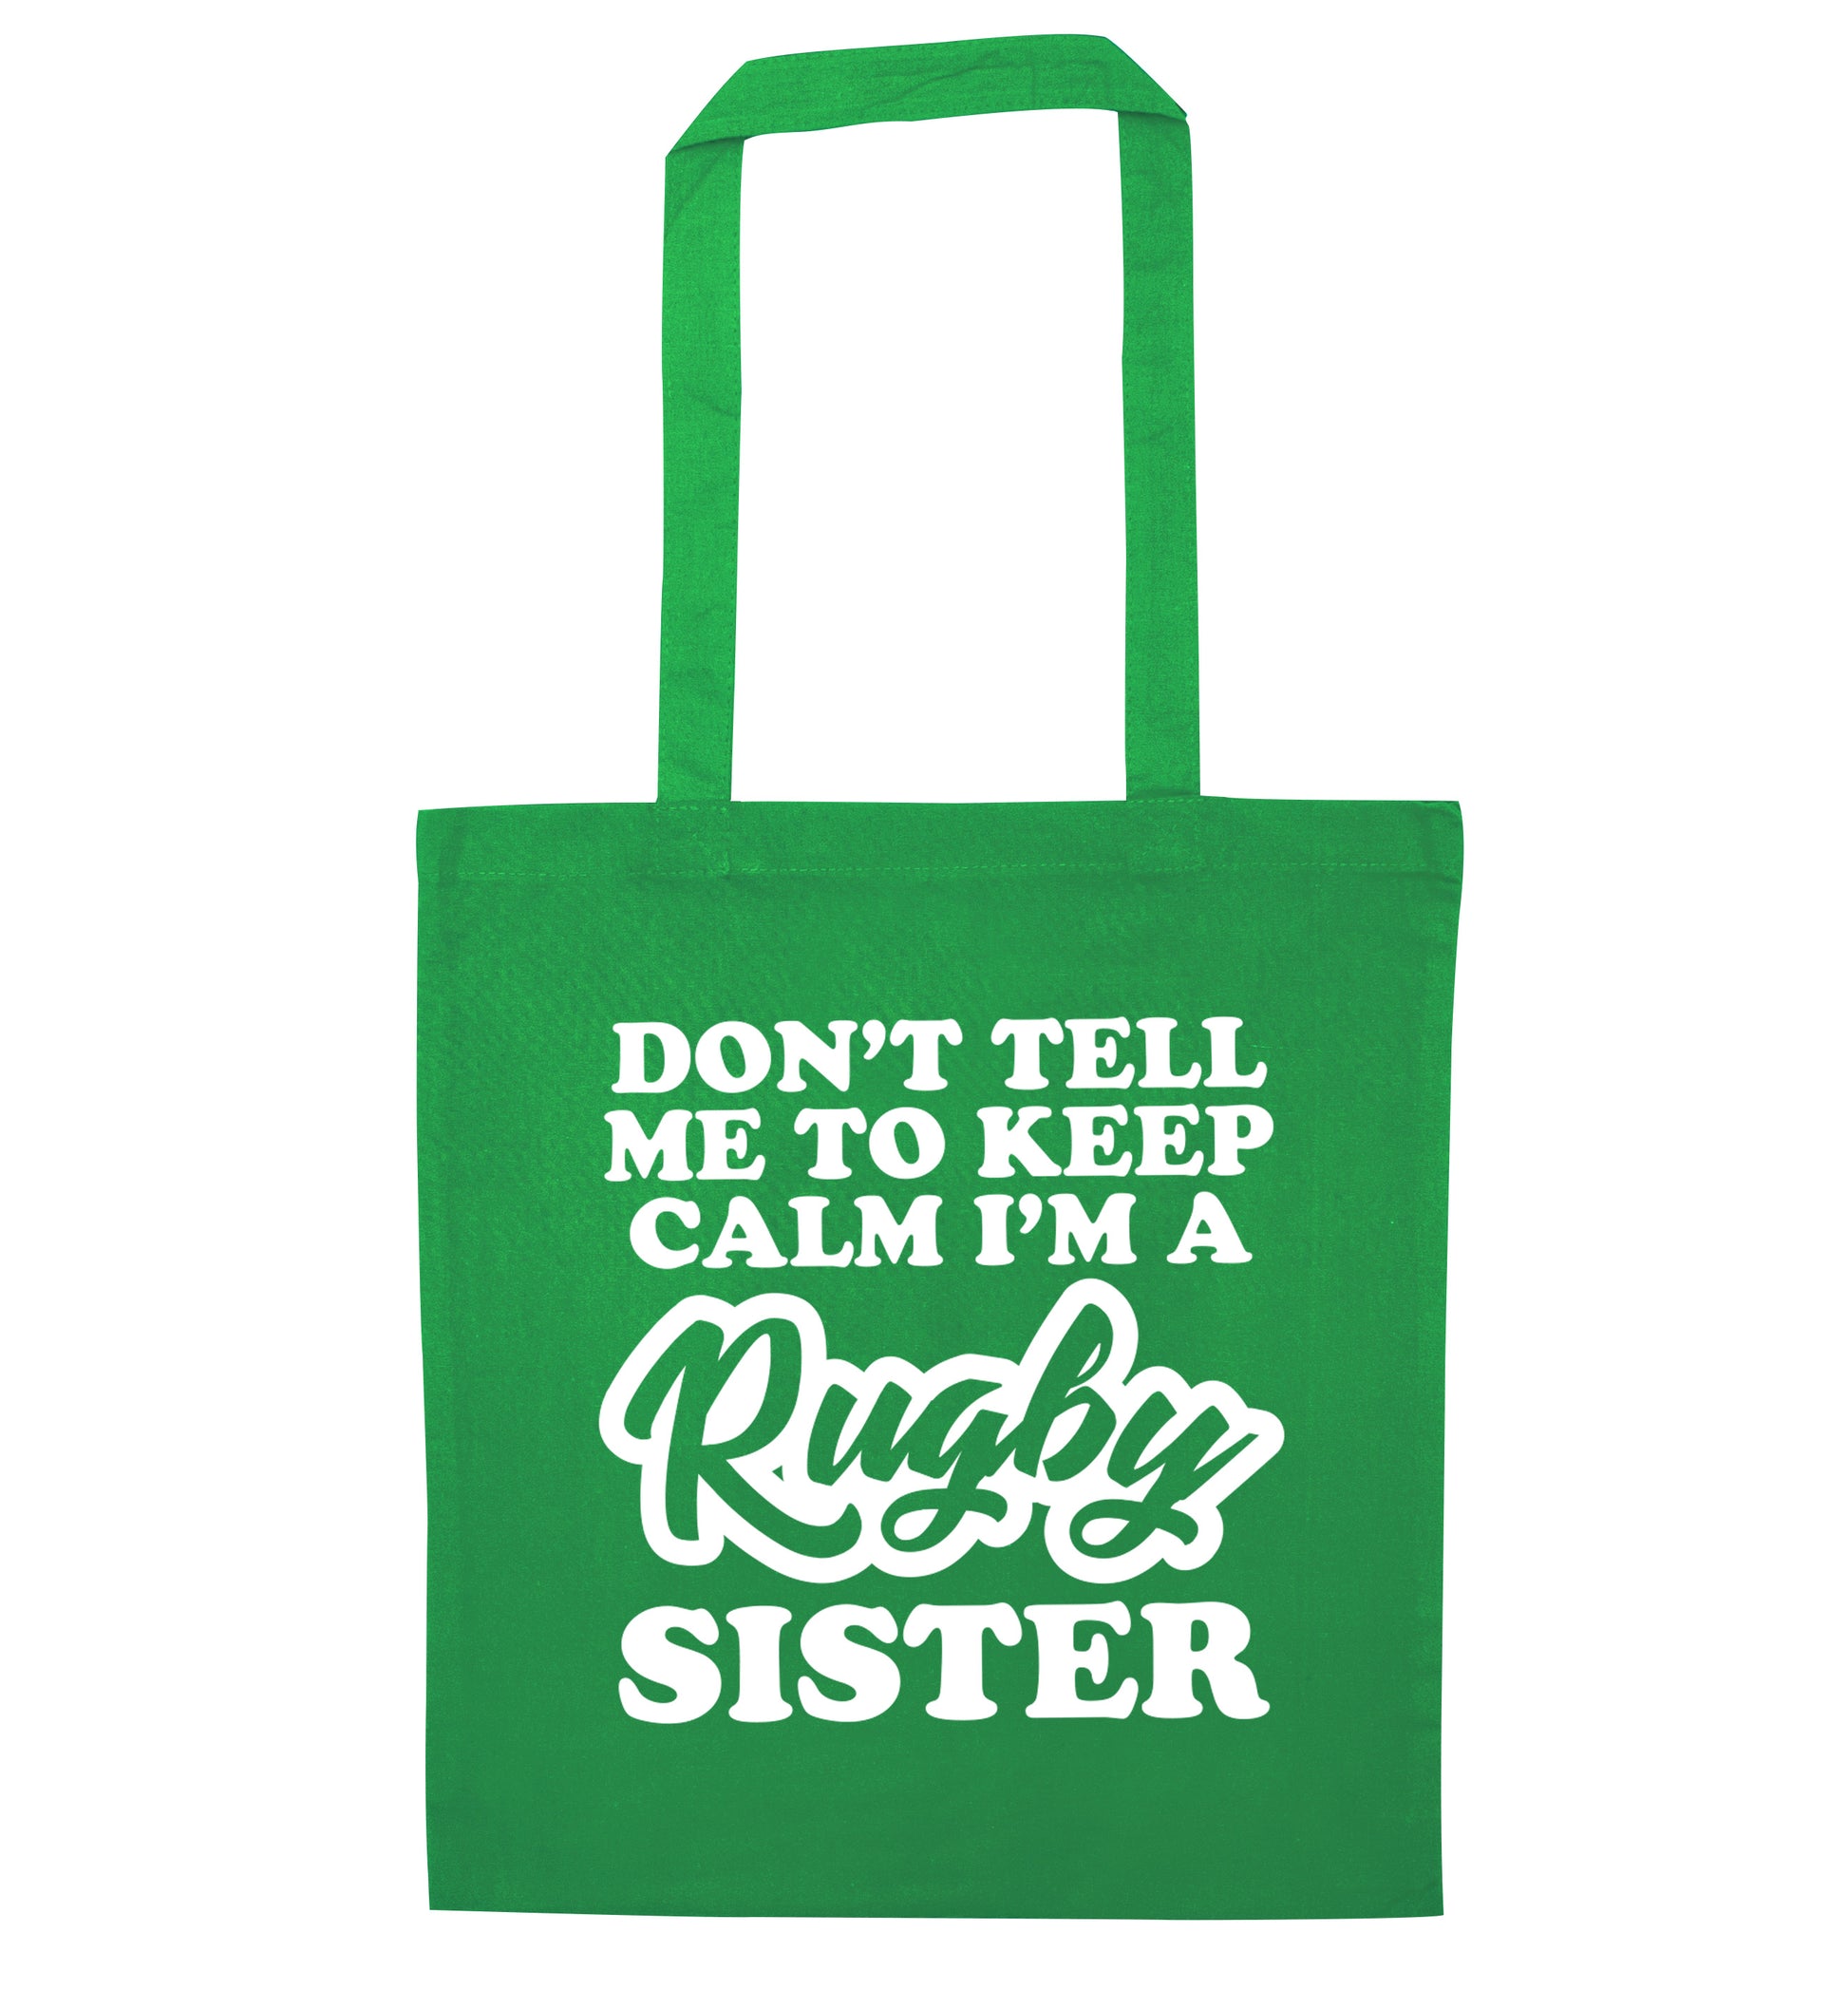 Don't tell me keep calm I'm a rugby sister green tote bag